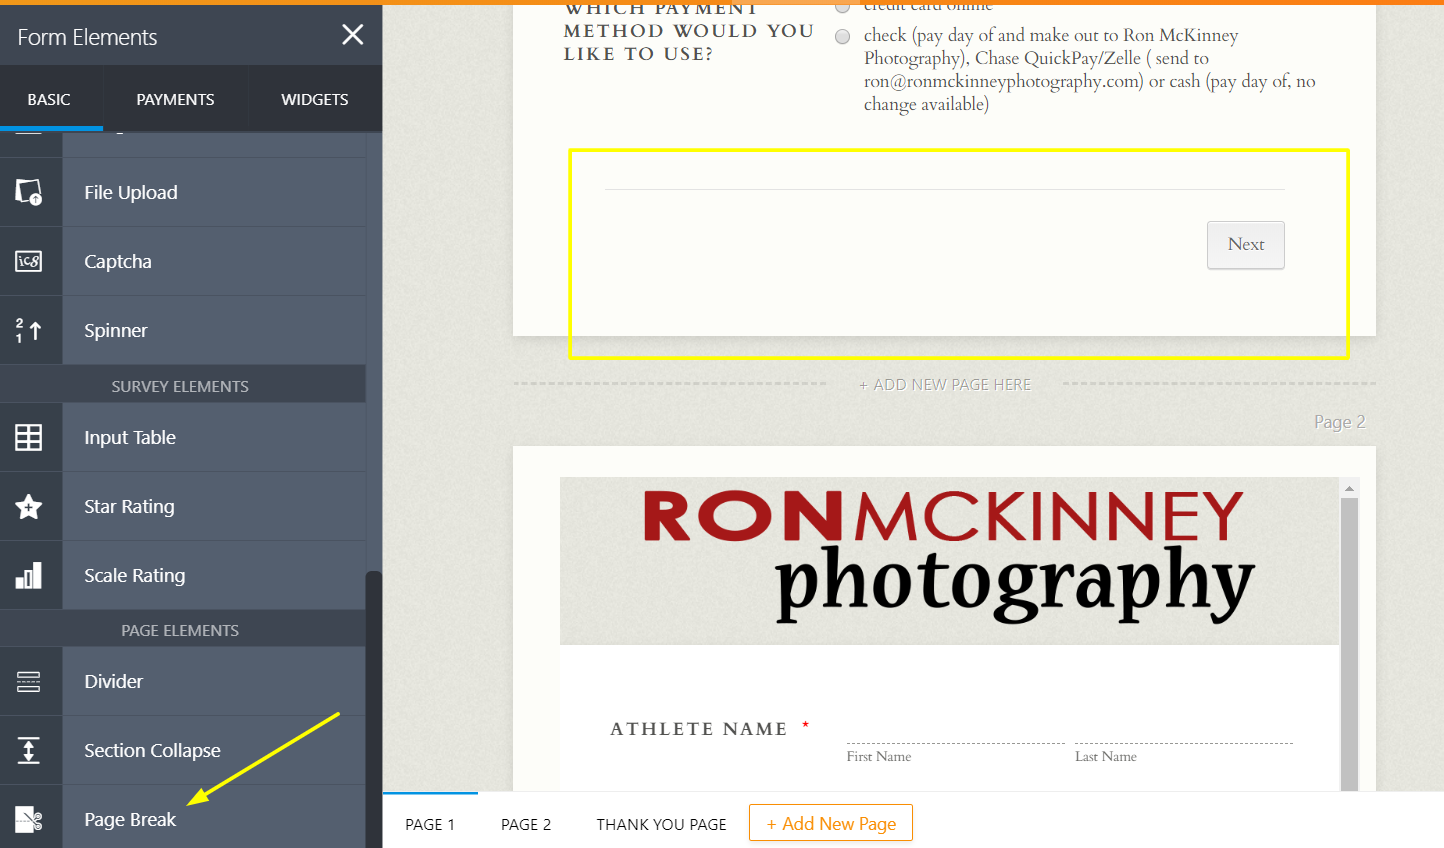 Submit button is not shown when form is accessed on mobile Image 2 Screenshot 51